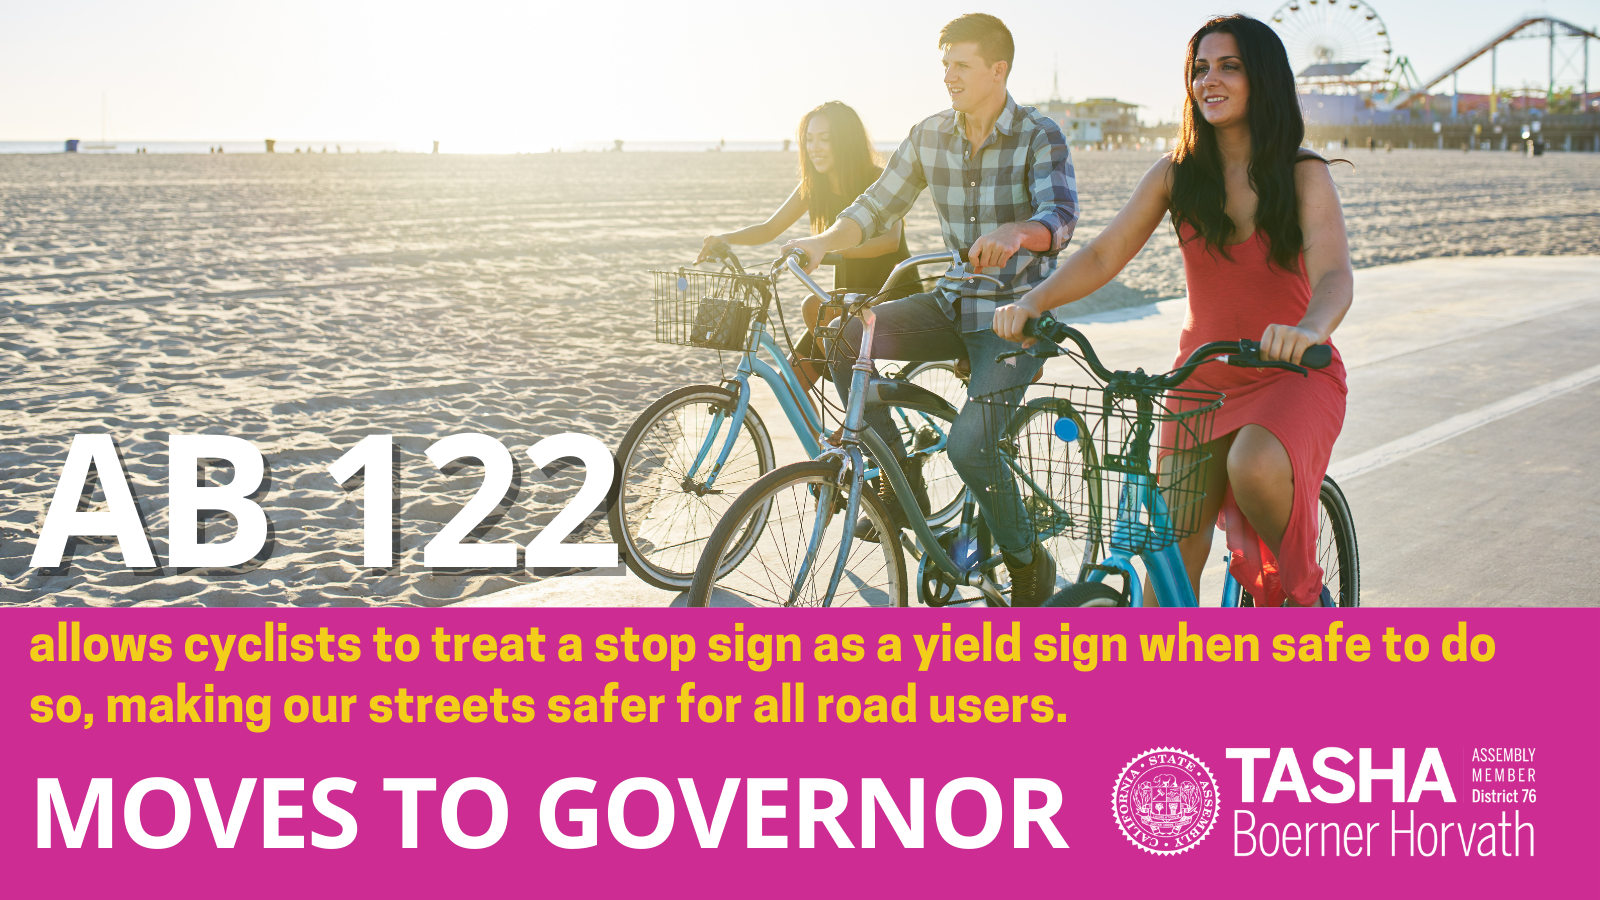 AB 122 Moves to Governor